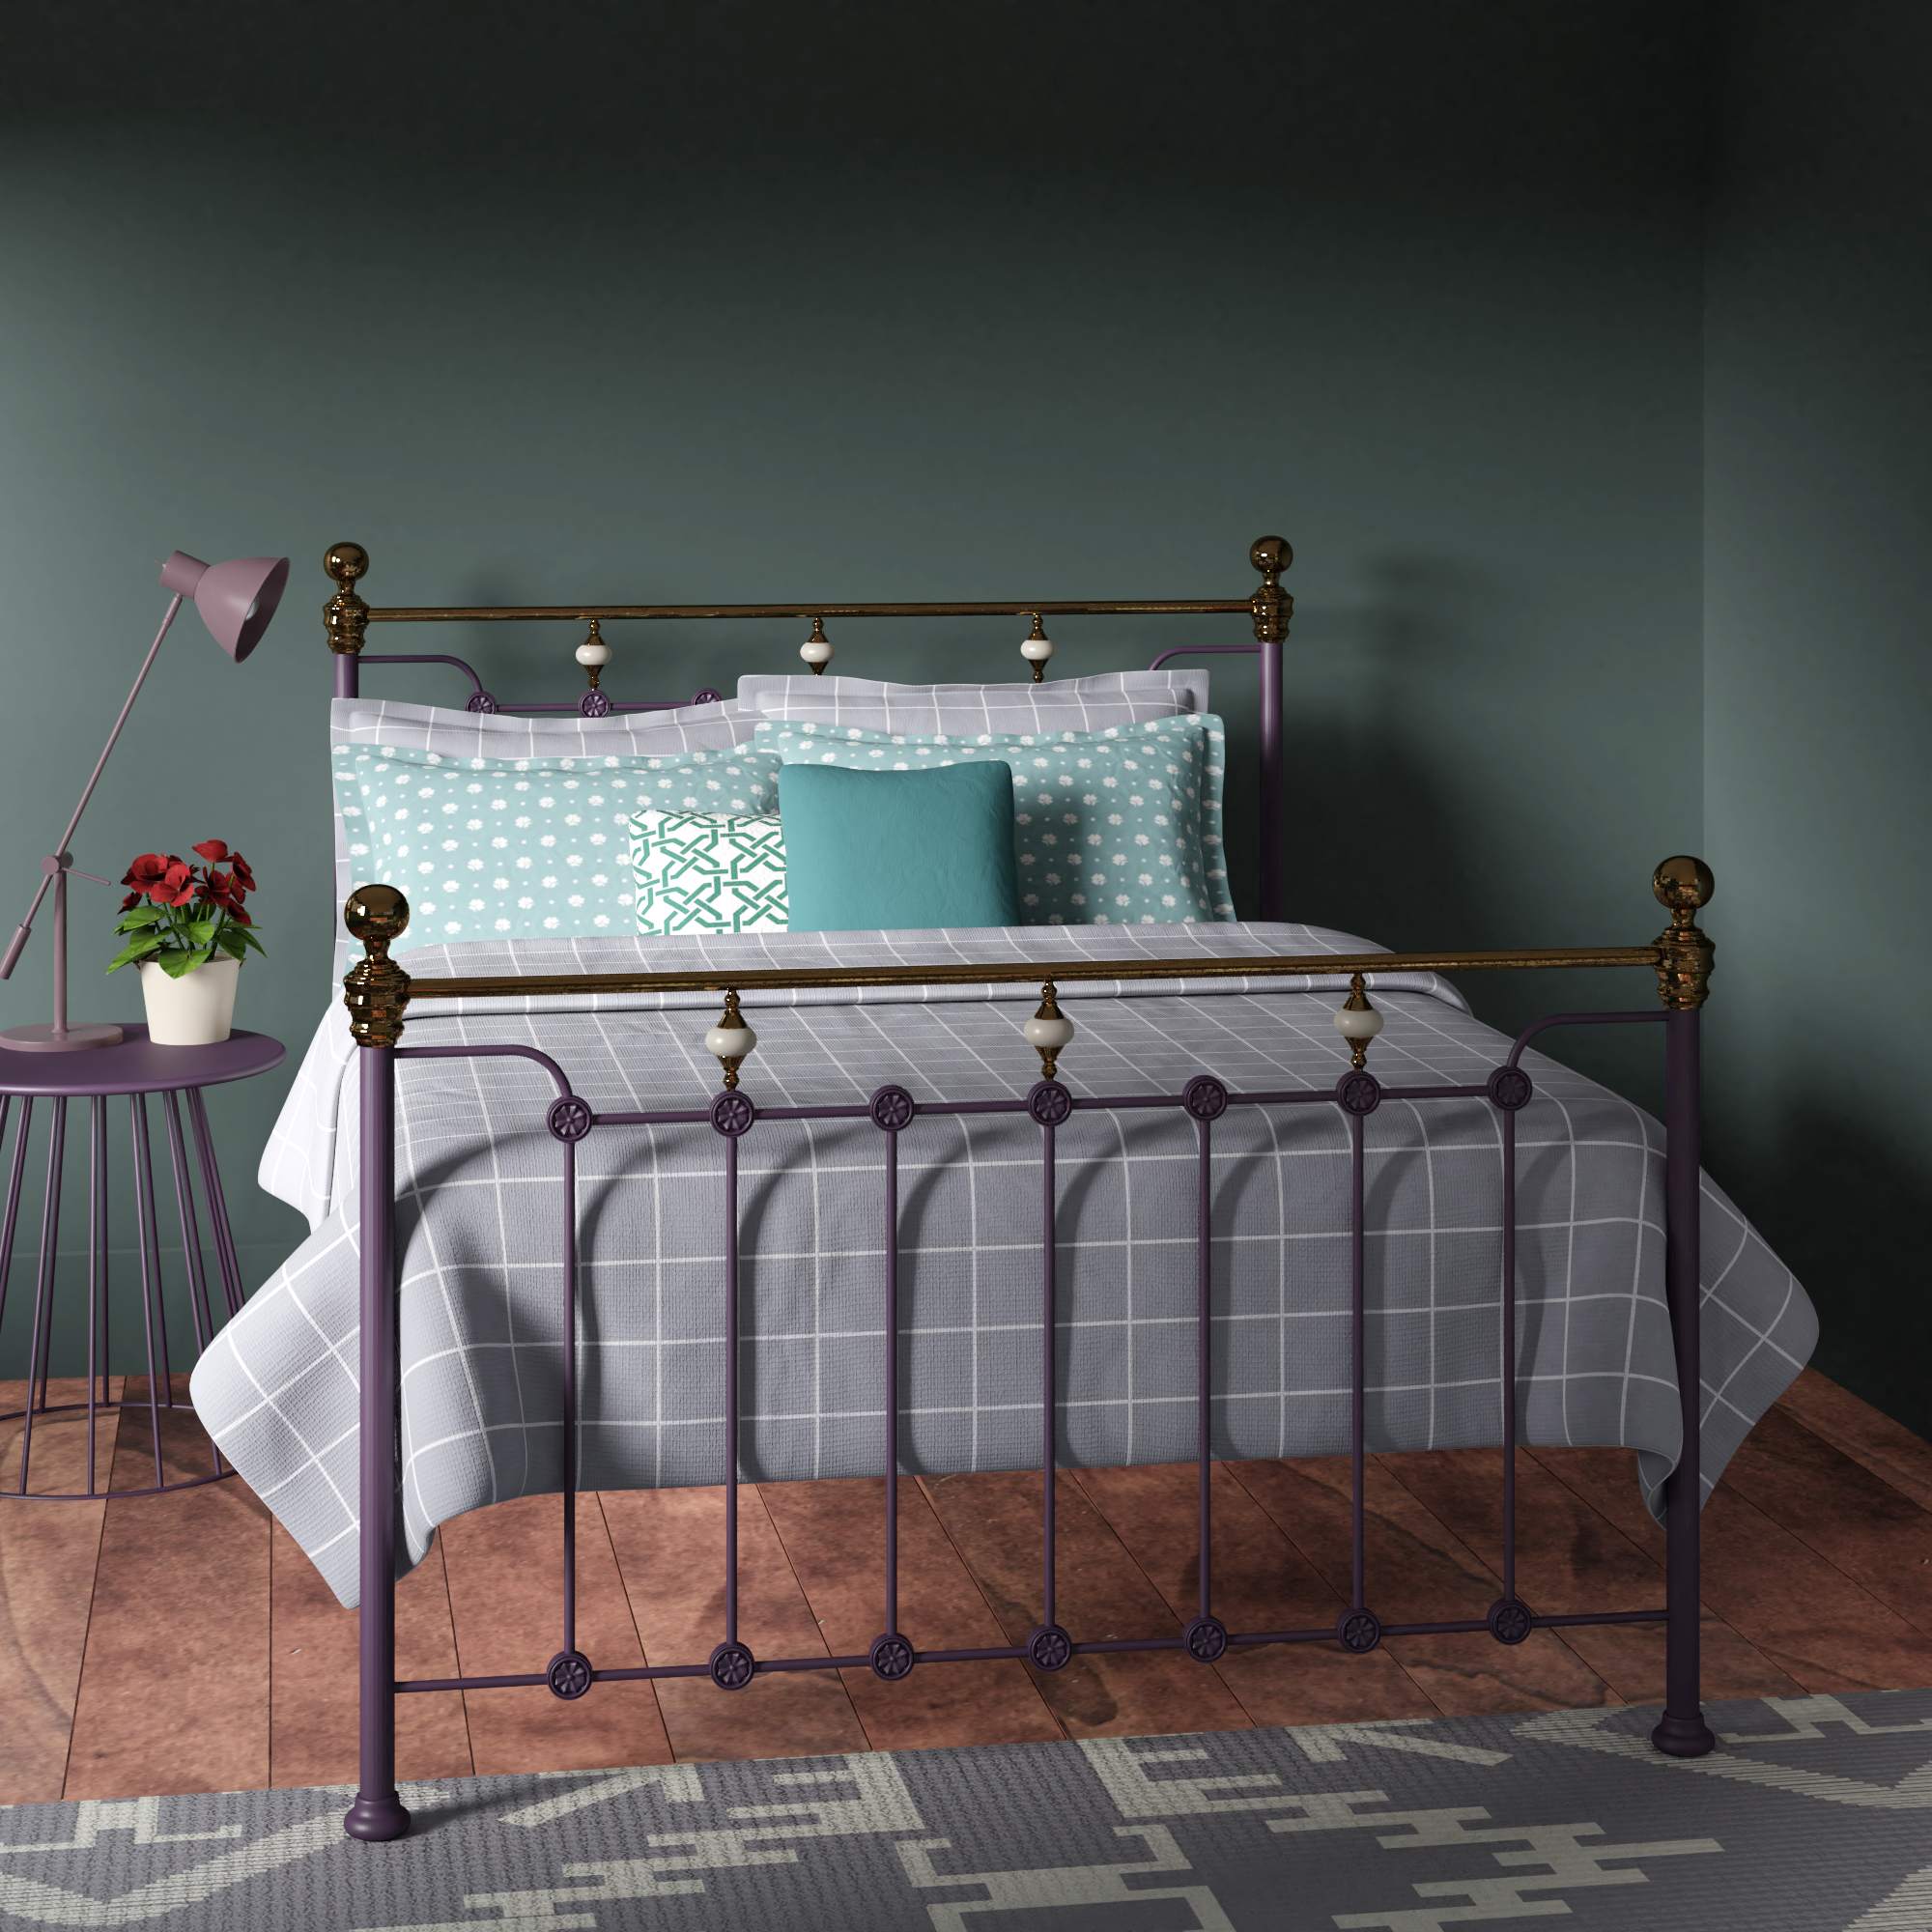 Glenholm iron bed - Image green and purple bedroom